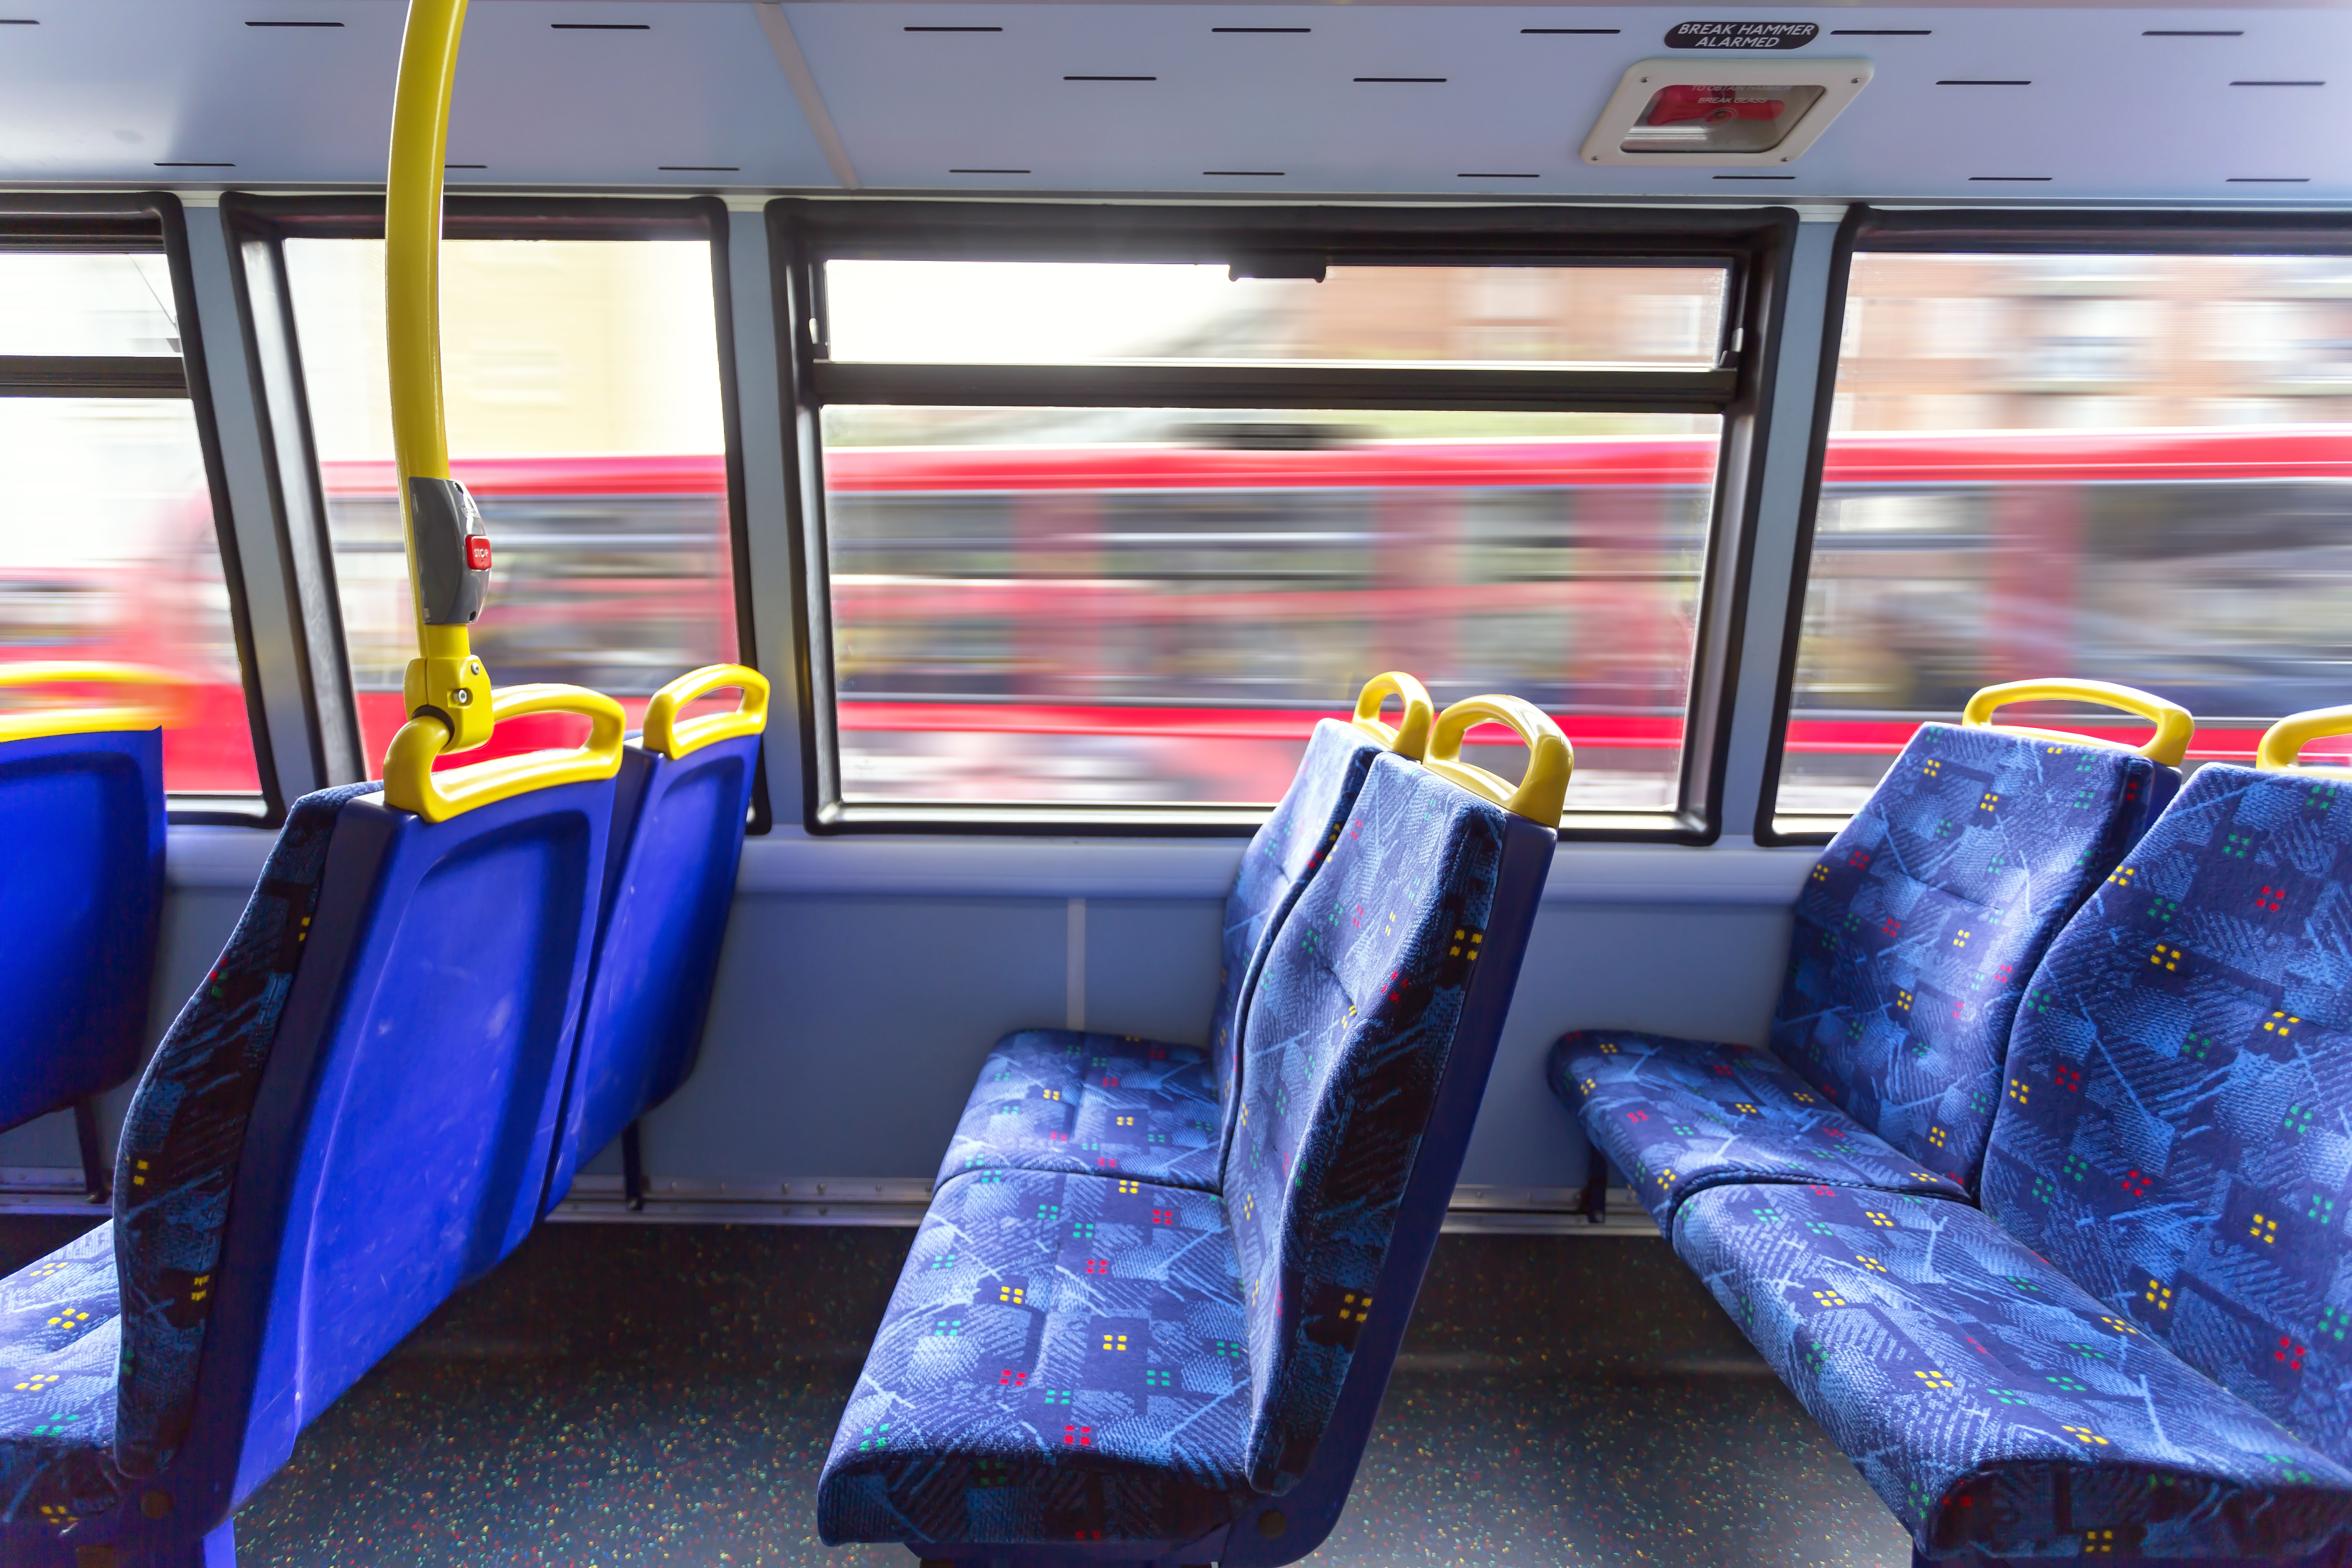 There’s a reason why bus seats always have garish patterns, and it’s disgusting